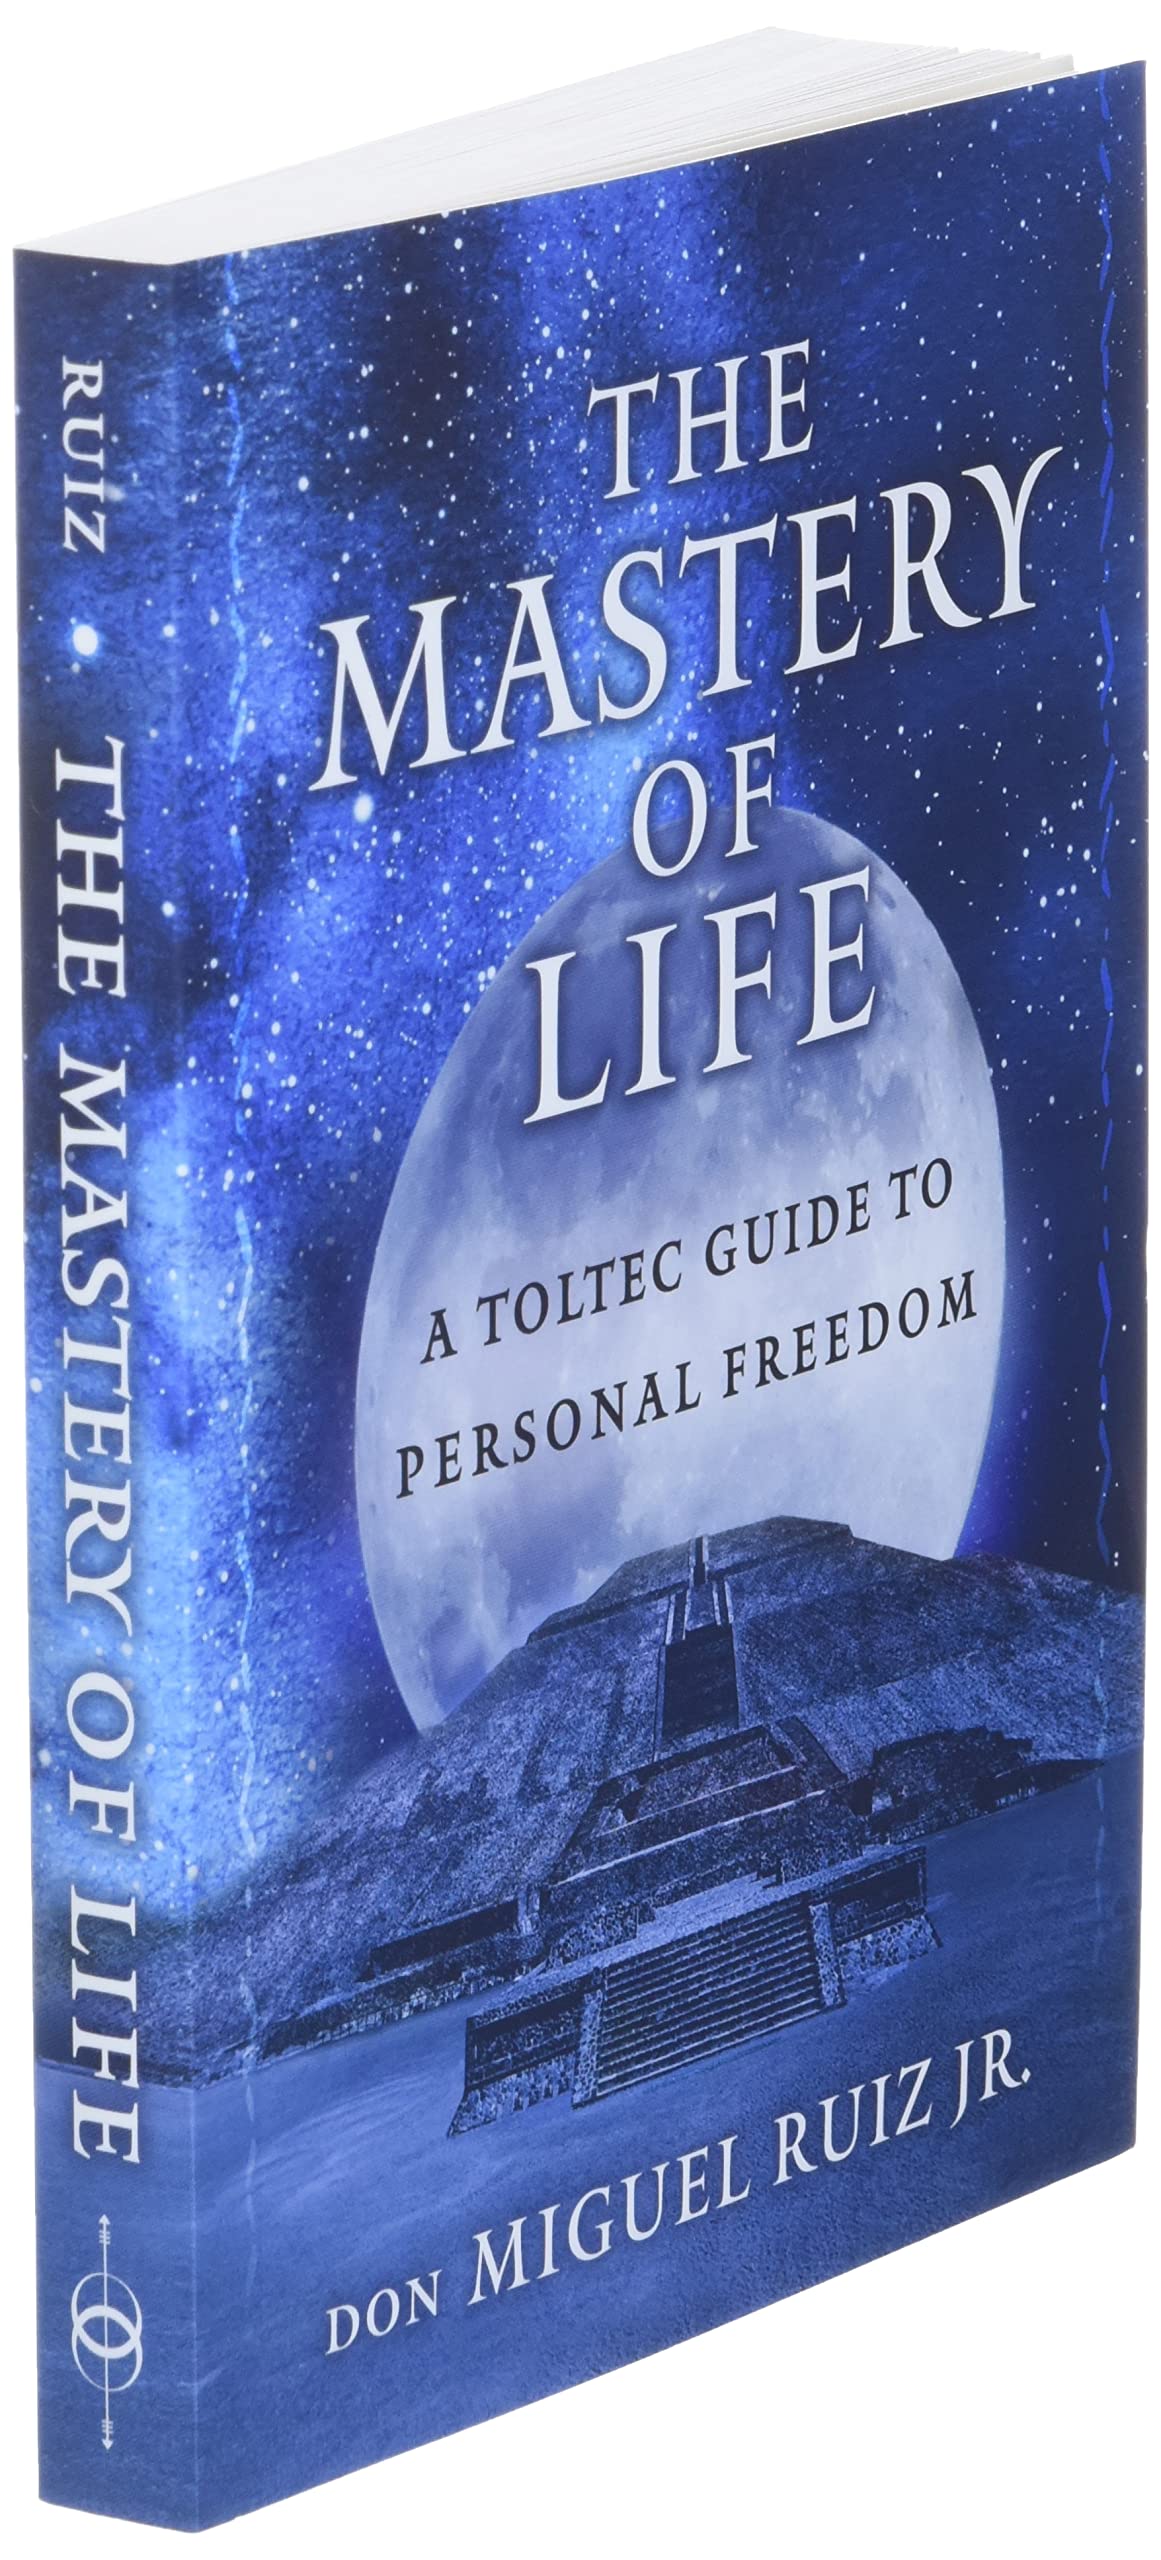 The Mastery of Life: A Toltec Guide to Personal Freedom (Paperback)